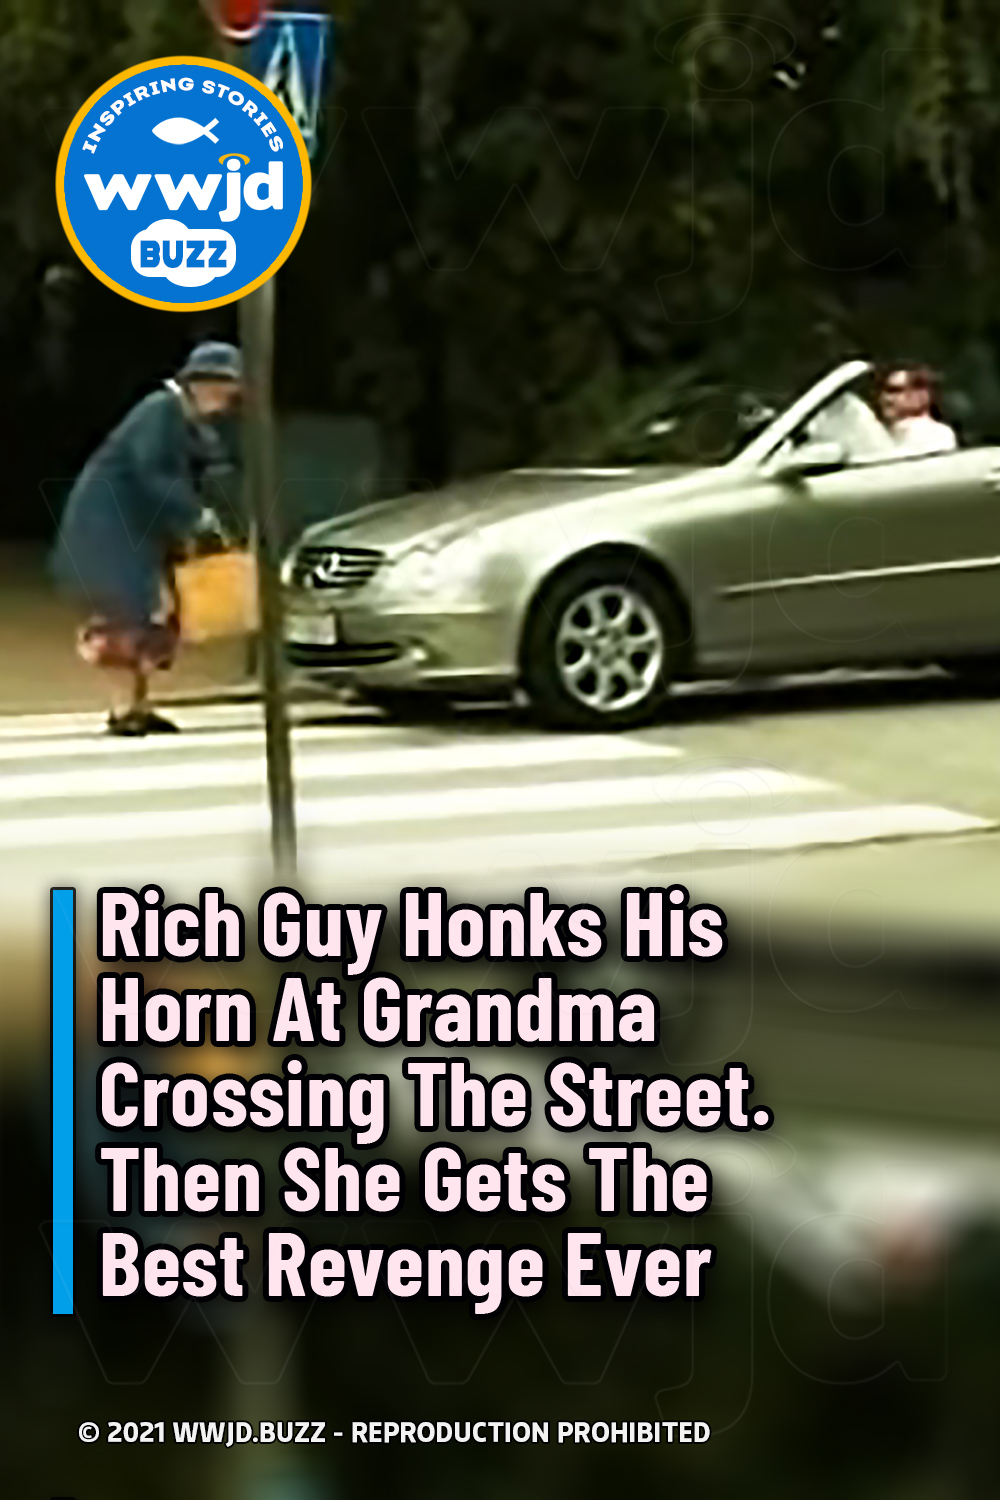 Rich Guy Honks His Horn At Grandma Crossing The Street. Then She Gets The Best Revenge Ever